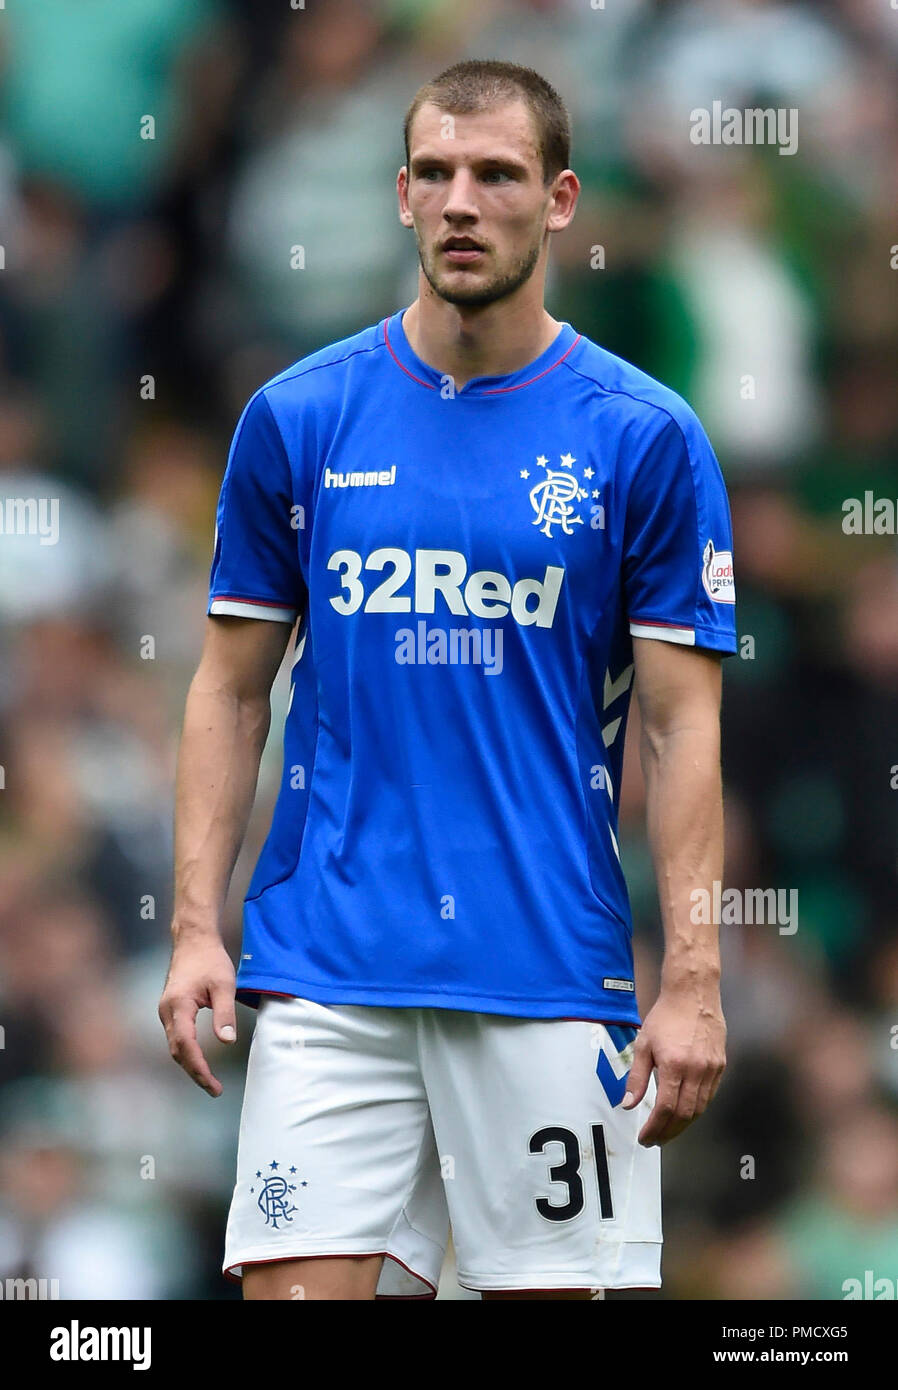 Rangers Borna Barisic during the Ladbrokes Scottish Premiership match at Celtic Park, Glasgow. PRESS ASSOCIATION Photo. Picture date: Sunday September 2, 2018. See PA story SOCCER Celtic. Photo credit should read: Ian Rutherford/PA Wire. Stock Photo